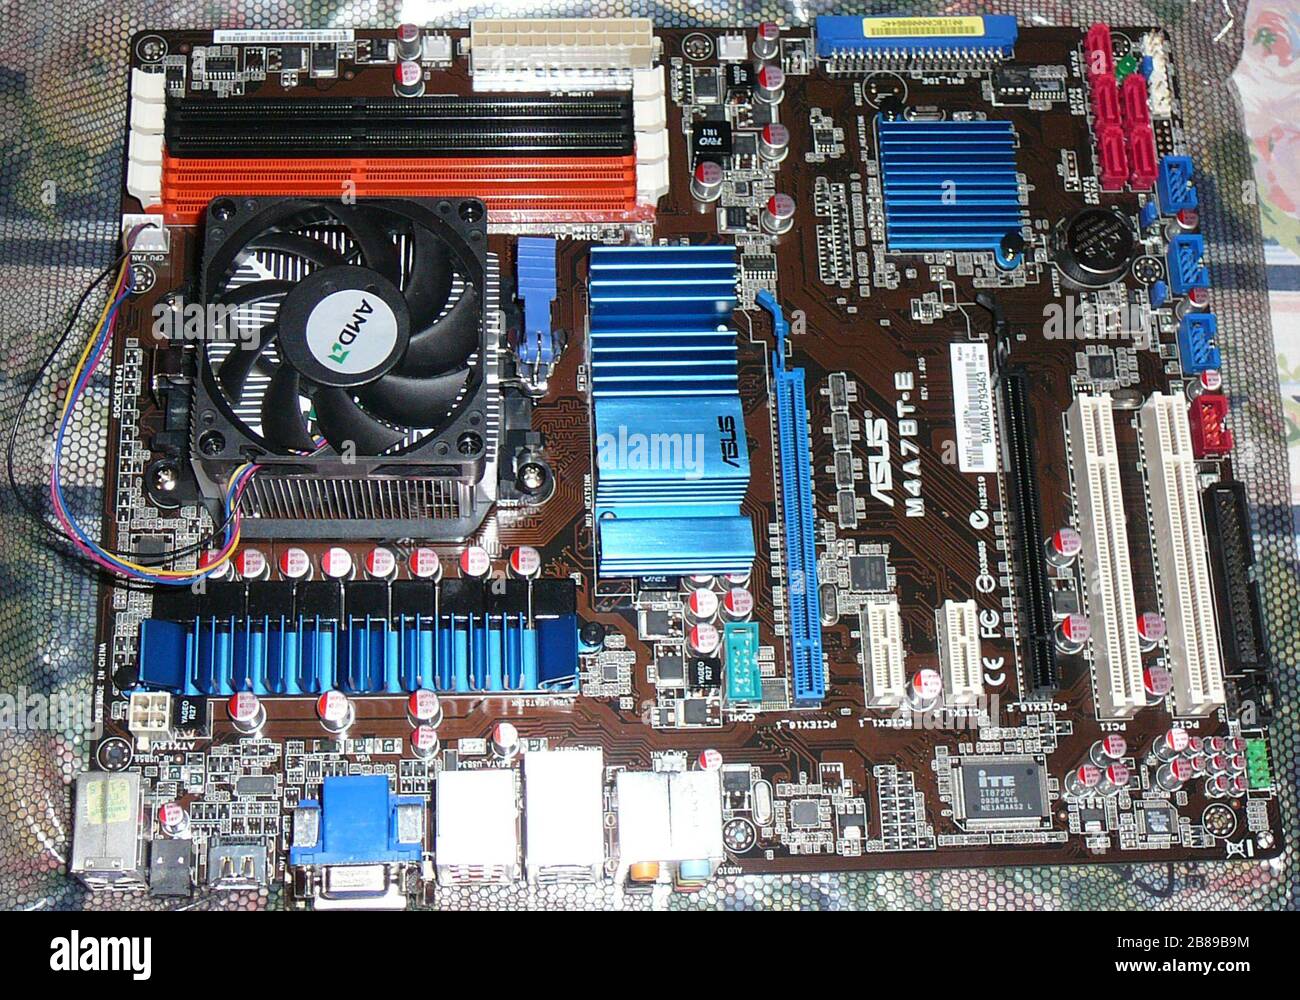 English: Asus M4A78T-E motherboard with AMD processor. First included in  http://students.washington.edu/rtg2/computer%20build.html; 24 December 2009  (according to Exif data); Transferred from en.wikipedia by SreeBot Original  text: I Reubentg created ...